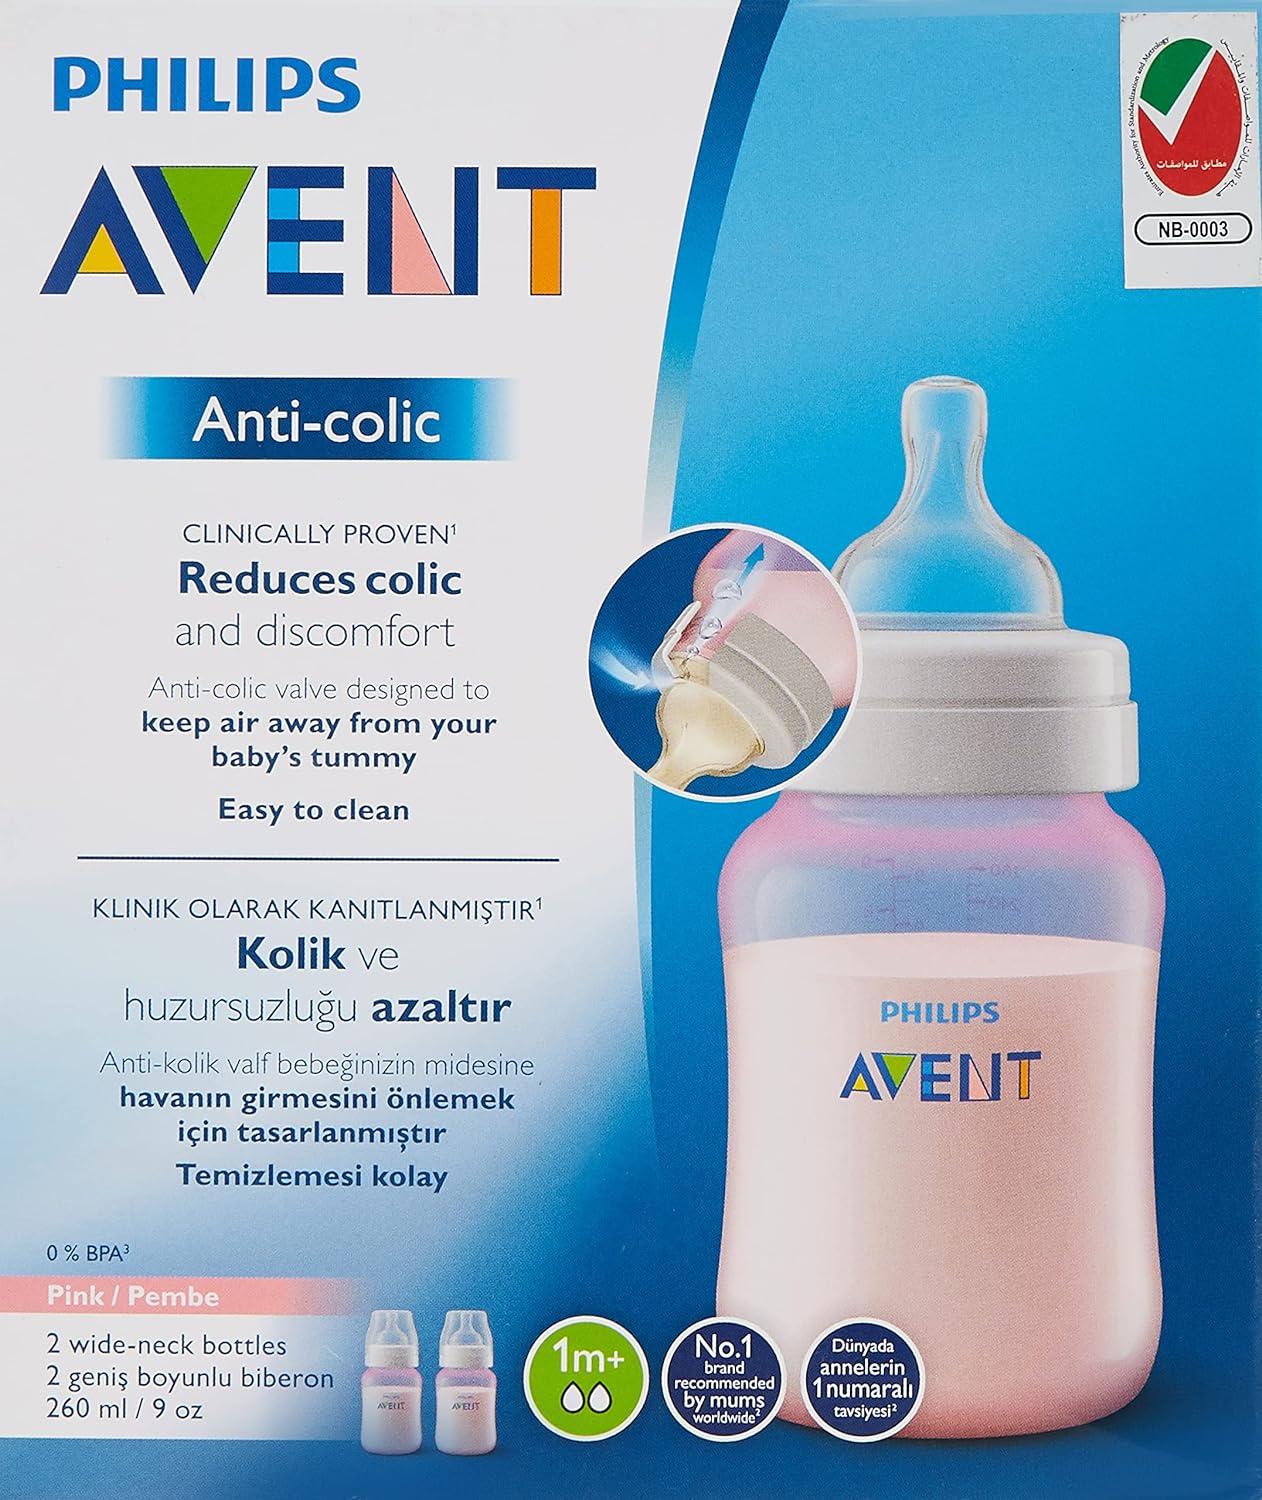 Philips Avent Anti Colic Feeding Bottle 260 Ml X 2 (Scf813/62) Visit the PHILIPS Store  4.5 4.5 out of 5 stars    158